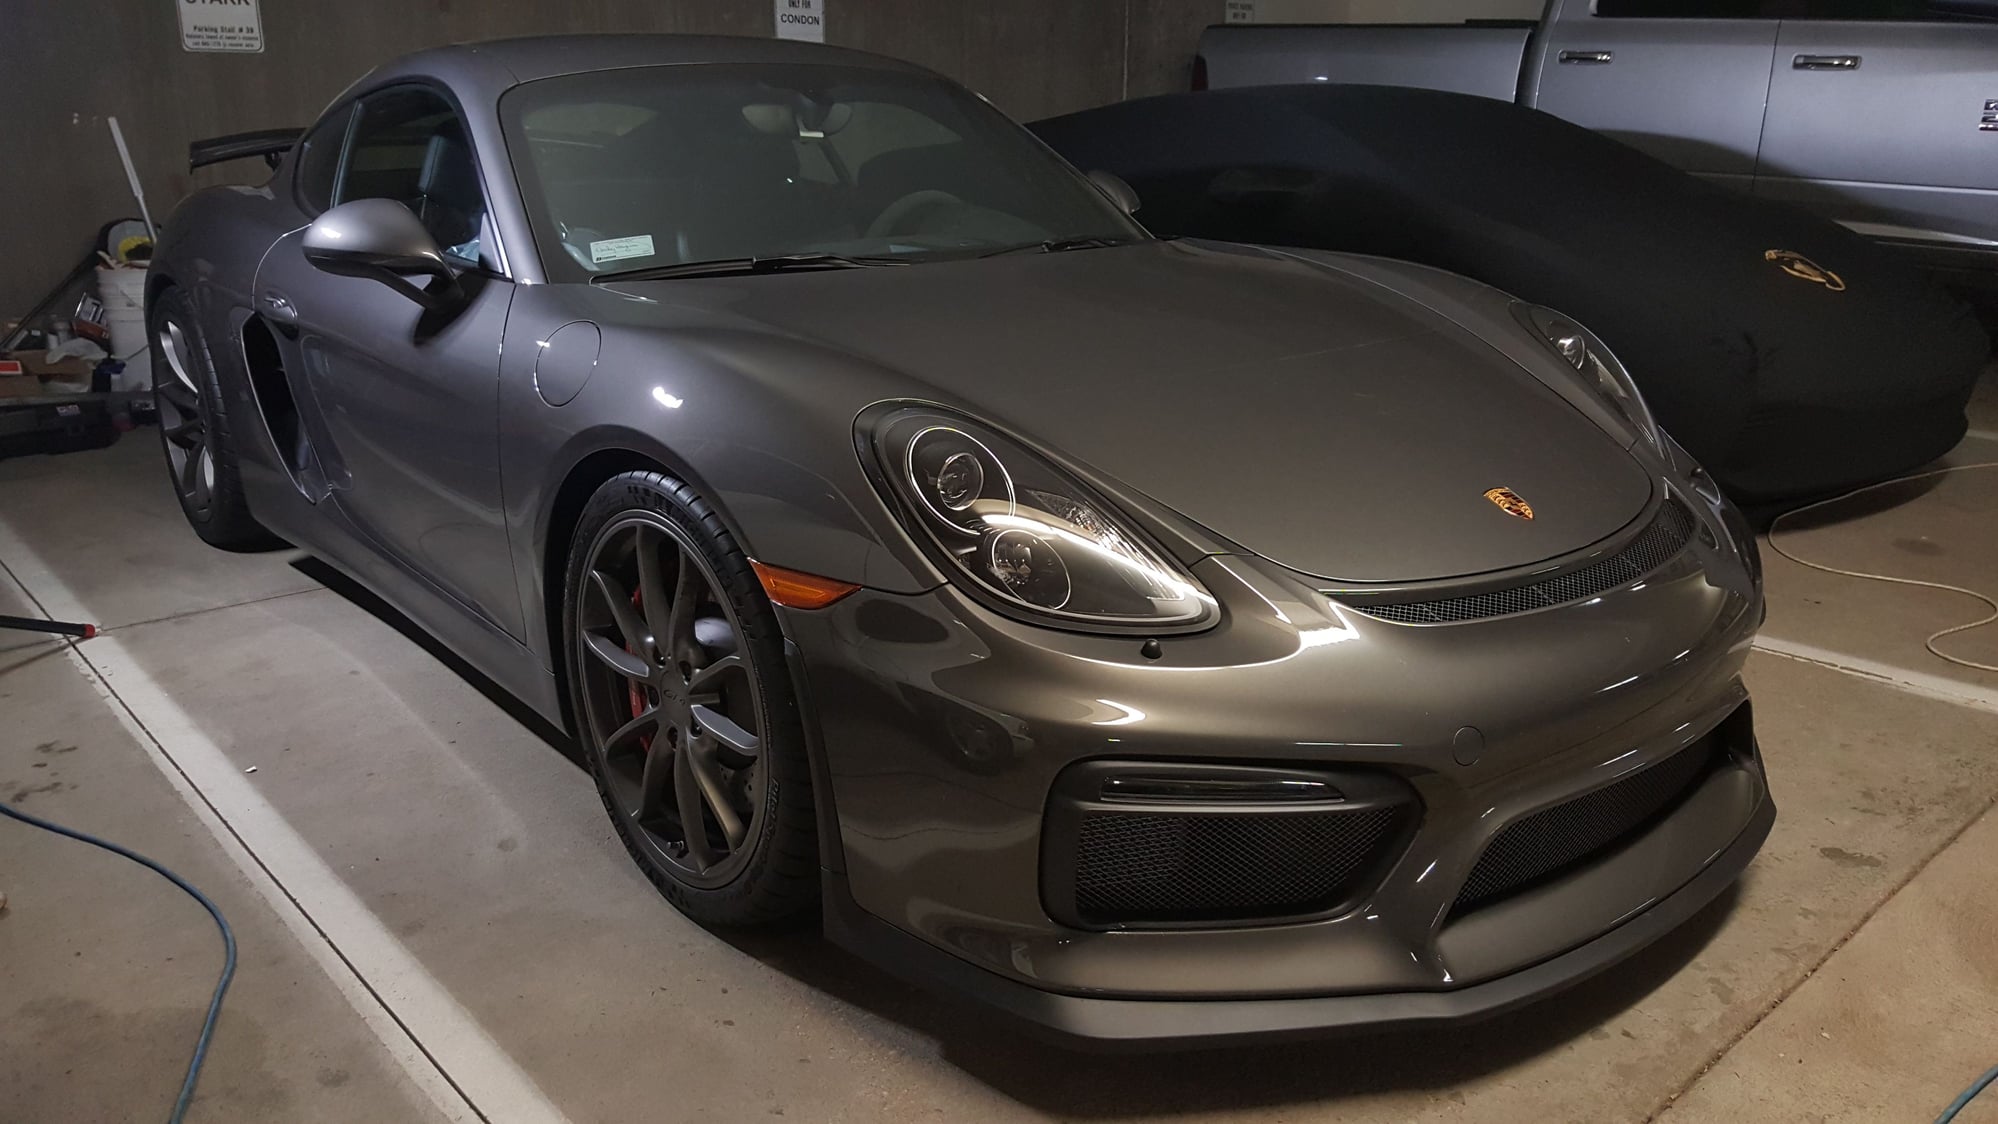 2016 Porsche Cayman GT4 - 2016 Porsche Cayman GT4 Agate LWB 1800 miles, Excellent condition, $120,000 - Used - Steamboat Springs, CO 80487, United States